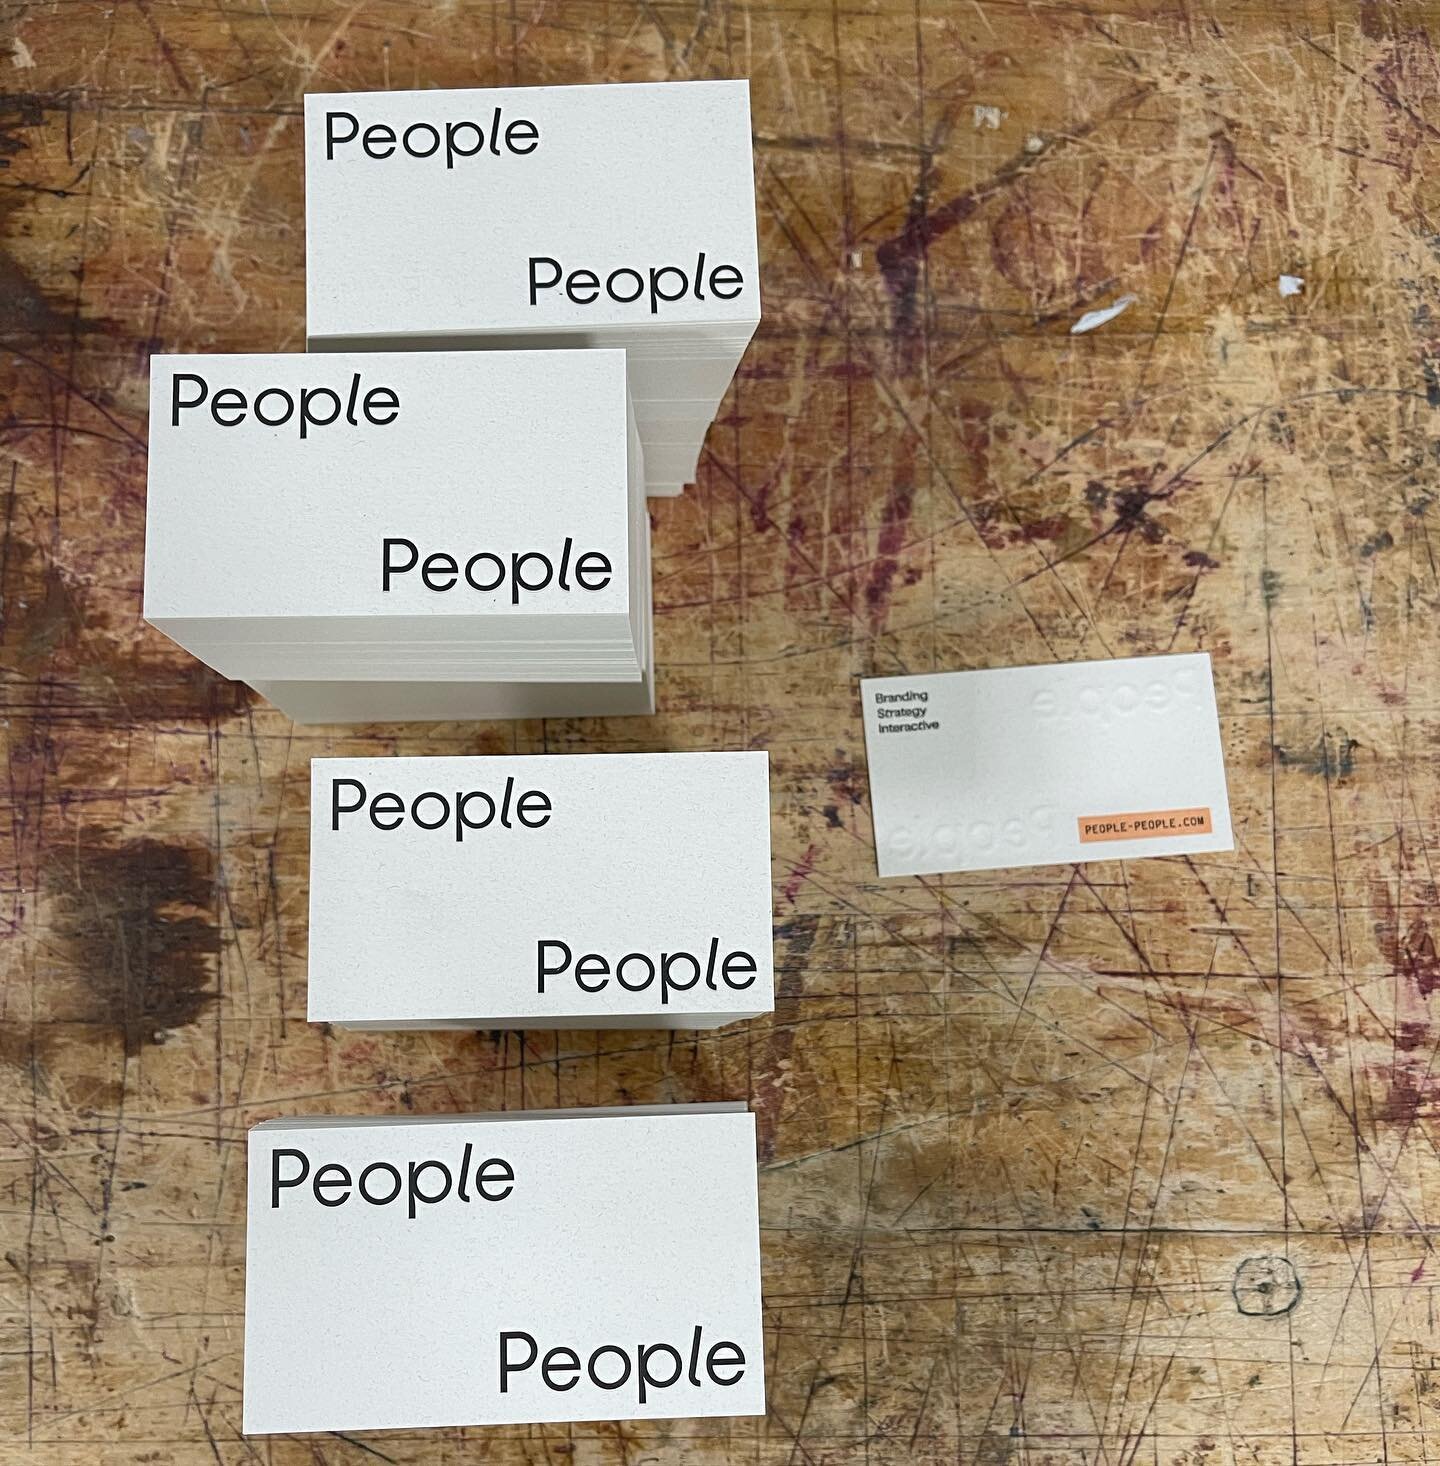 New cards for @people.people.studio are on the table and ready to box up.
.
.
.
#letterpress #deboss #epfineprinting #apexofanalog #madeinmagnolia